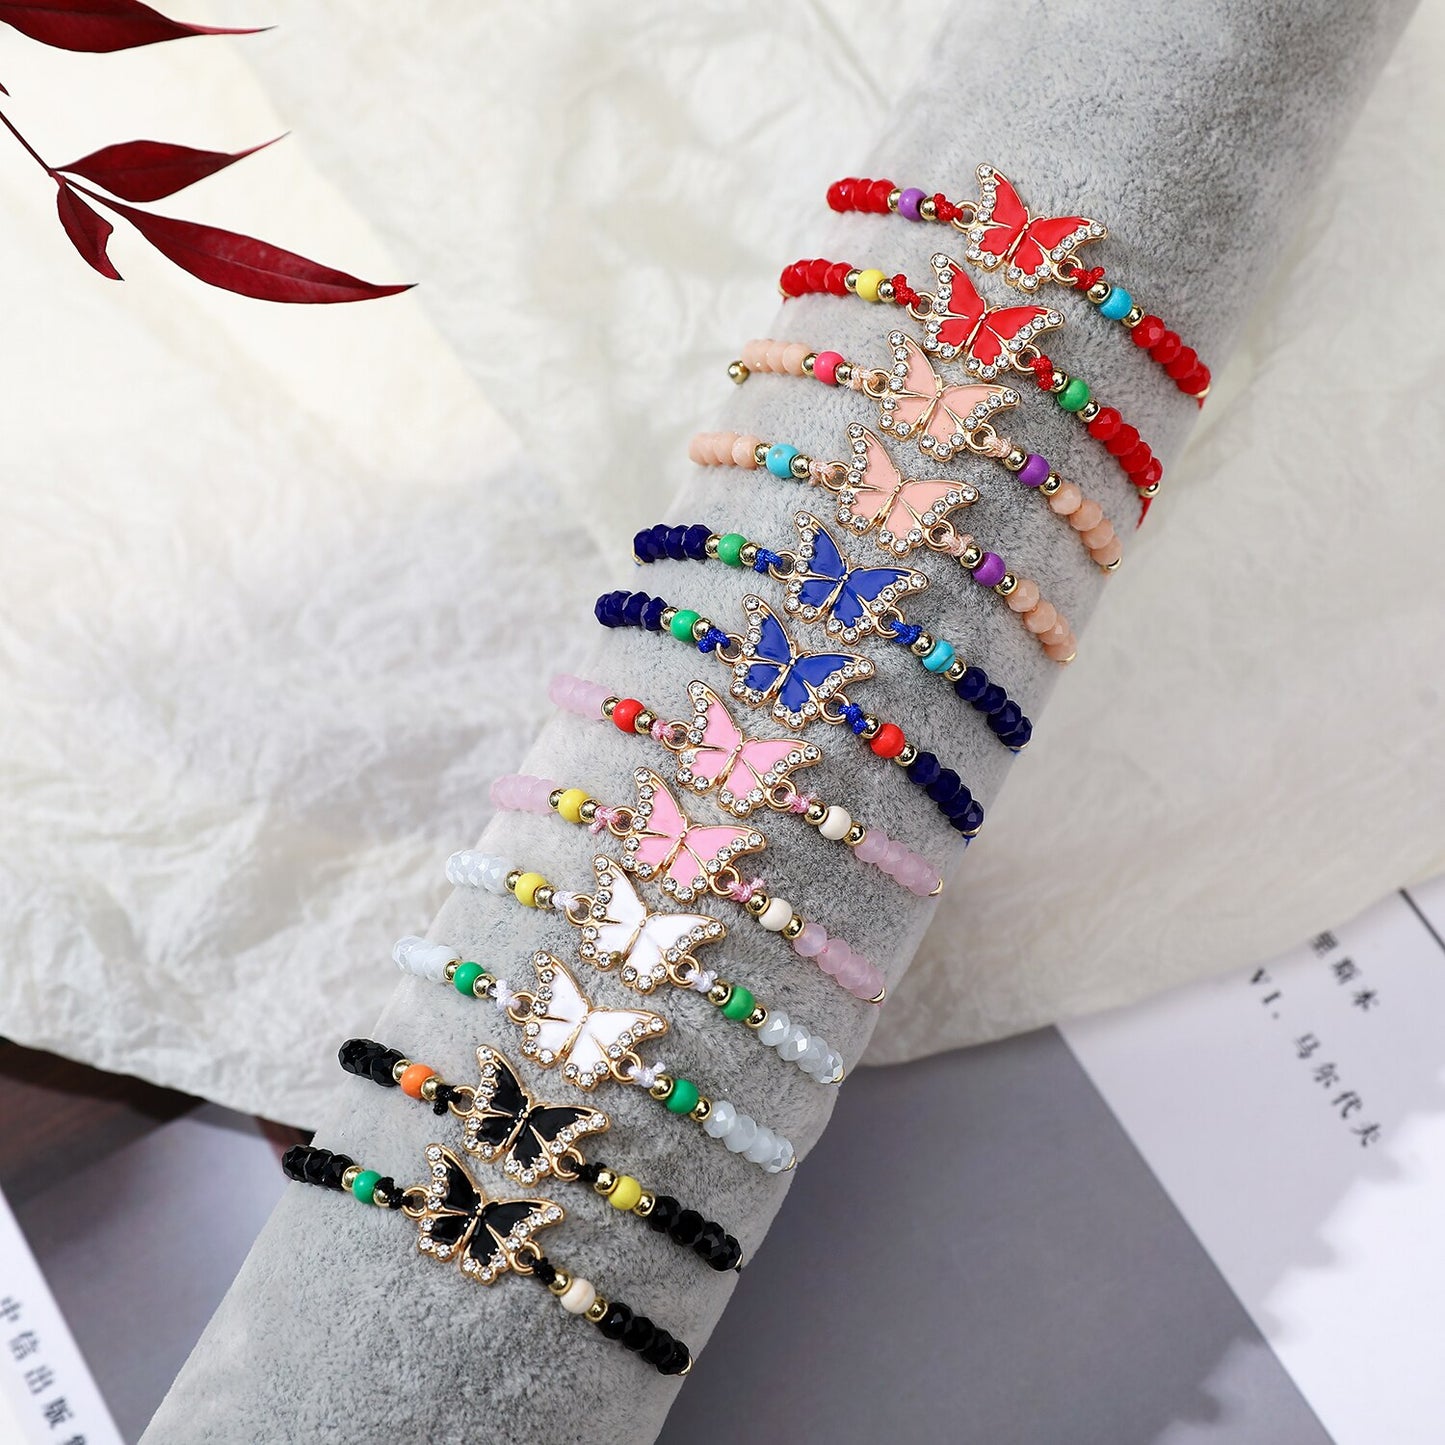 12pcs/lot Colorful Crystal Rhinestone Beads Butterfly Pendant Charm Bracelet for Girls Adjustable Anklet Kids Jewelry Wholesale